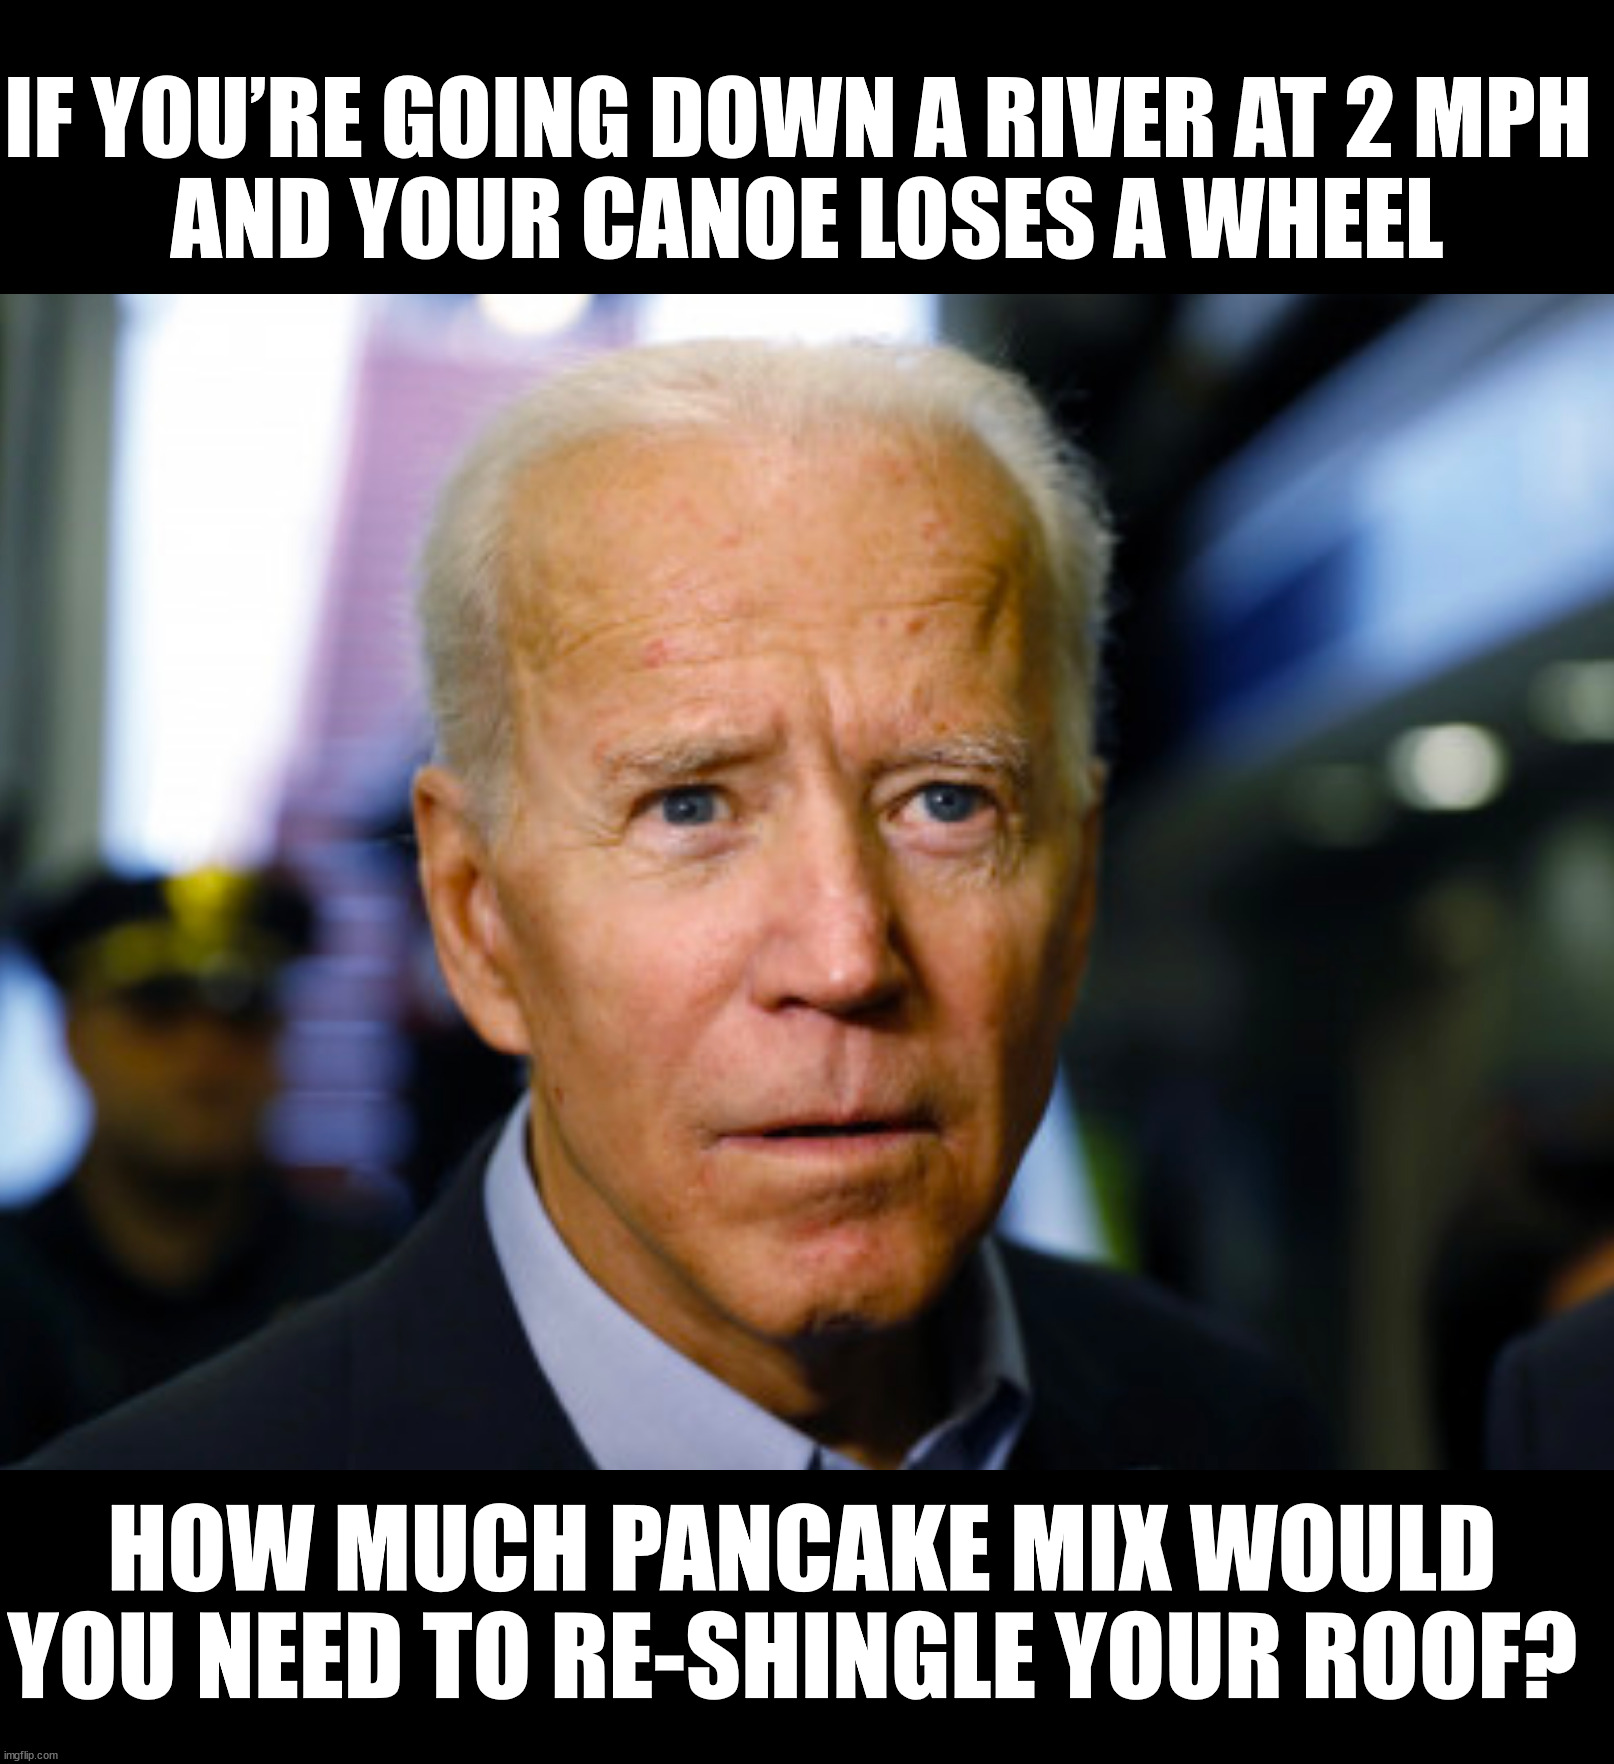 Joe Biden confused | IF YOU’RE GOING DOWN A RIVER AT 2 MPH 
AND YOUR CANOE LOSES A WHEEL HOW MUCH PANCAKE MIX WOULD YOU NEED TO RE-SHINGLE YOUR ROOF? | image tagged in joe biden confused | made w/ Imgflip meme maker